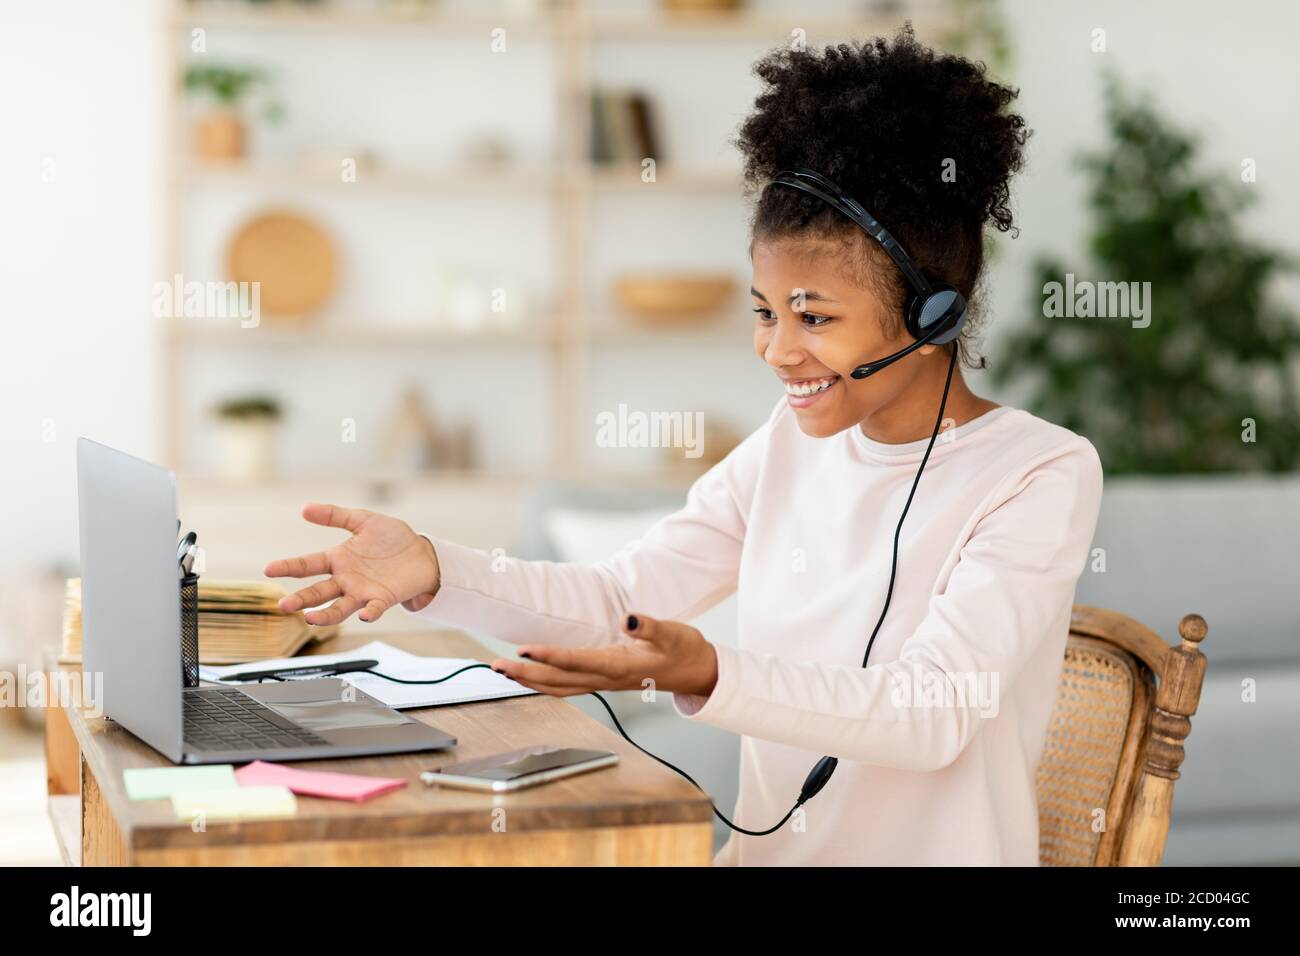 African Teen Girl At Laptop Learning Having Class Sitting Indoors Stock Photo